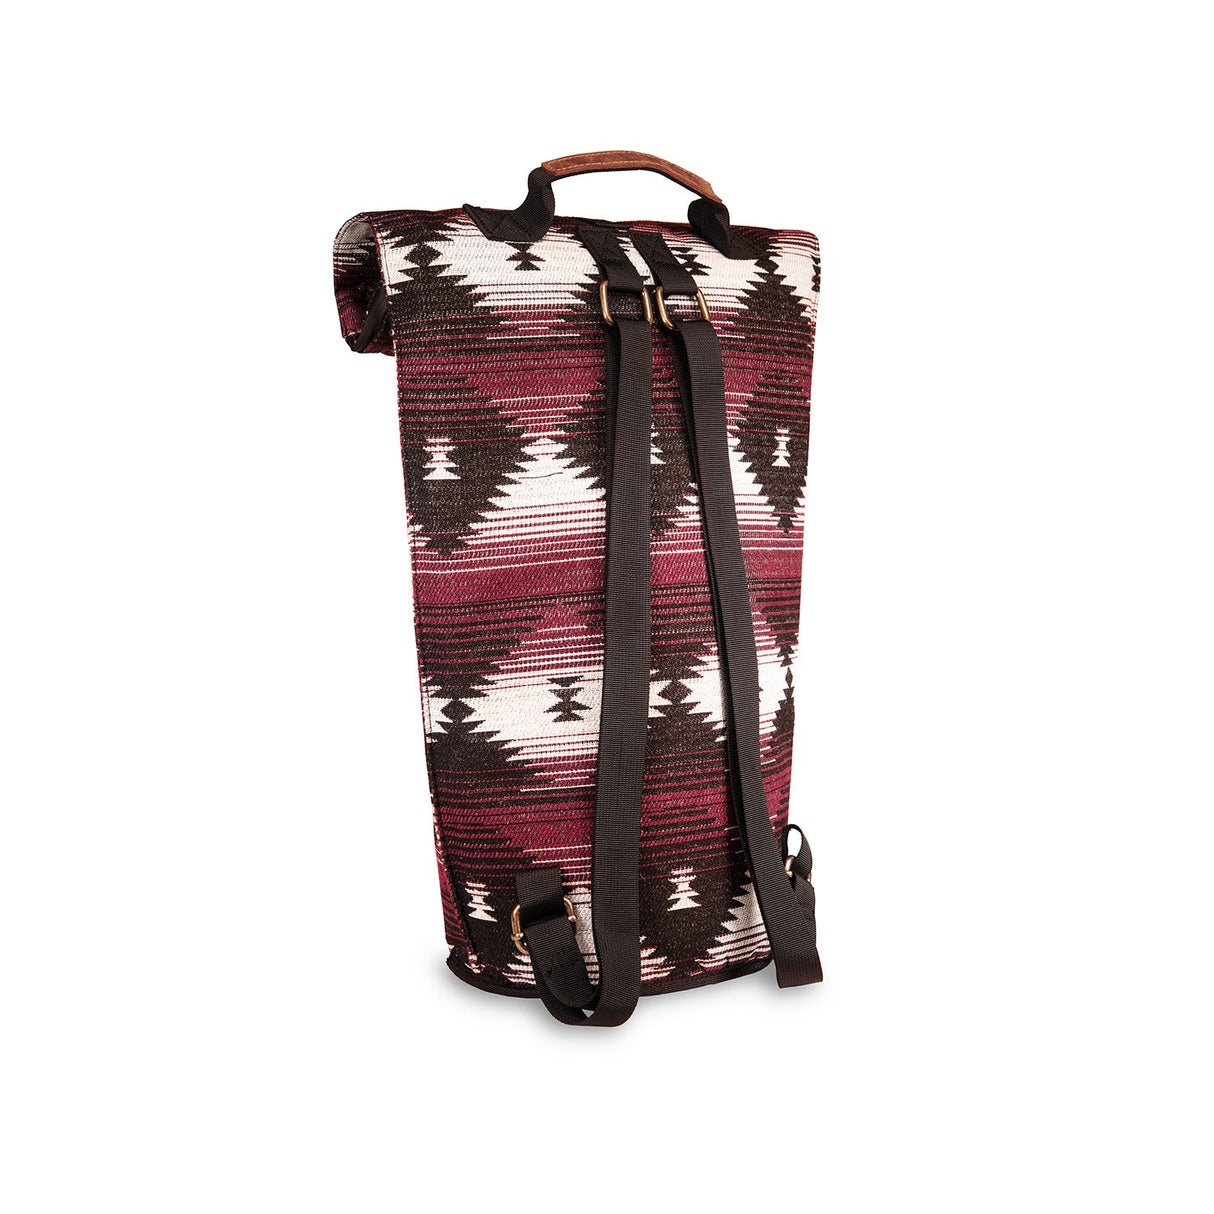 Revelry Supply 'The Defender' Smell Proof Padded Backpack with Southwestern Print - Side View